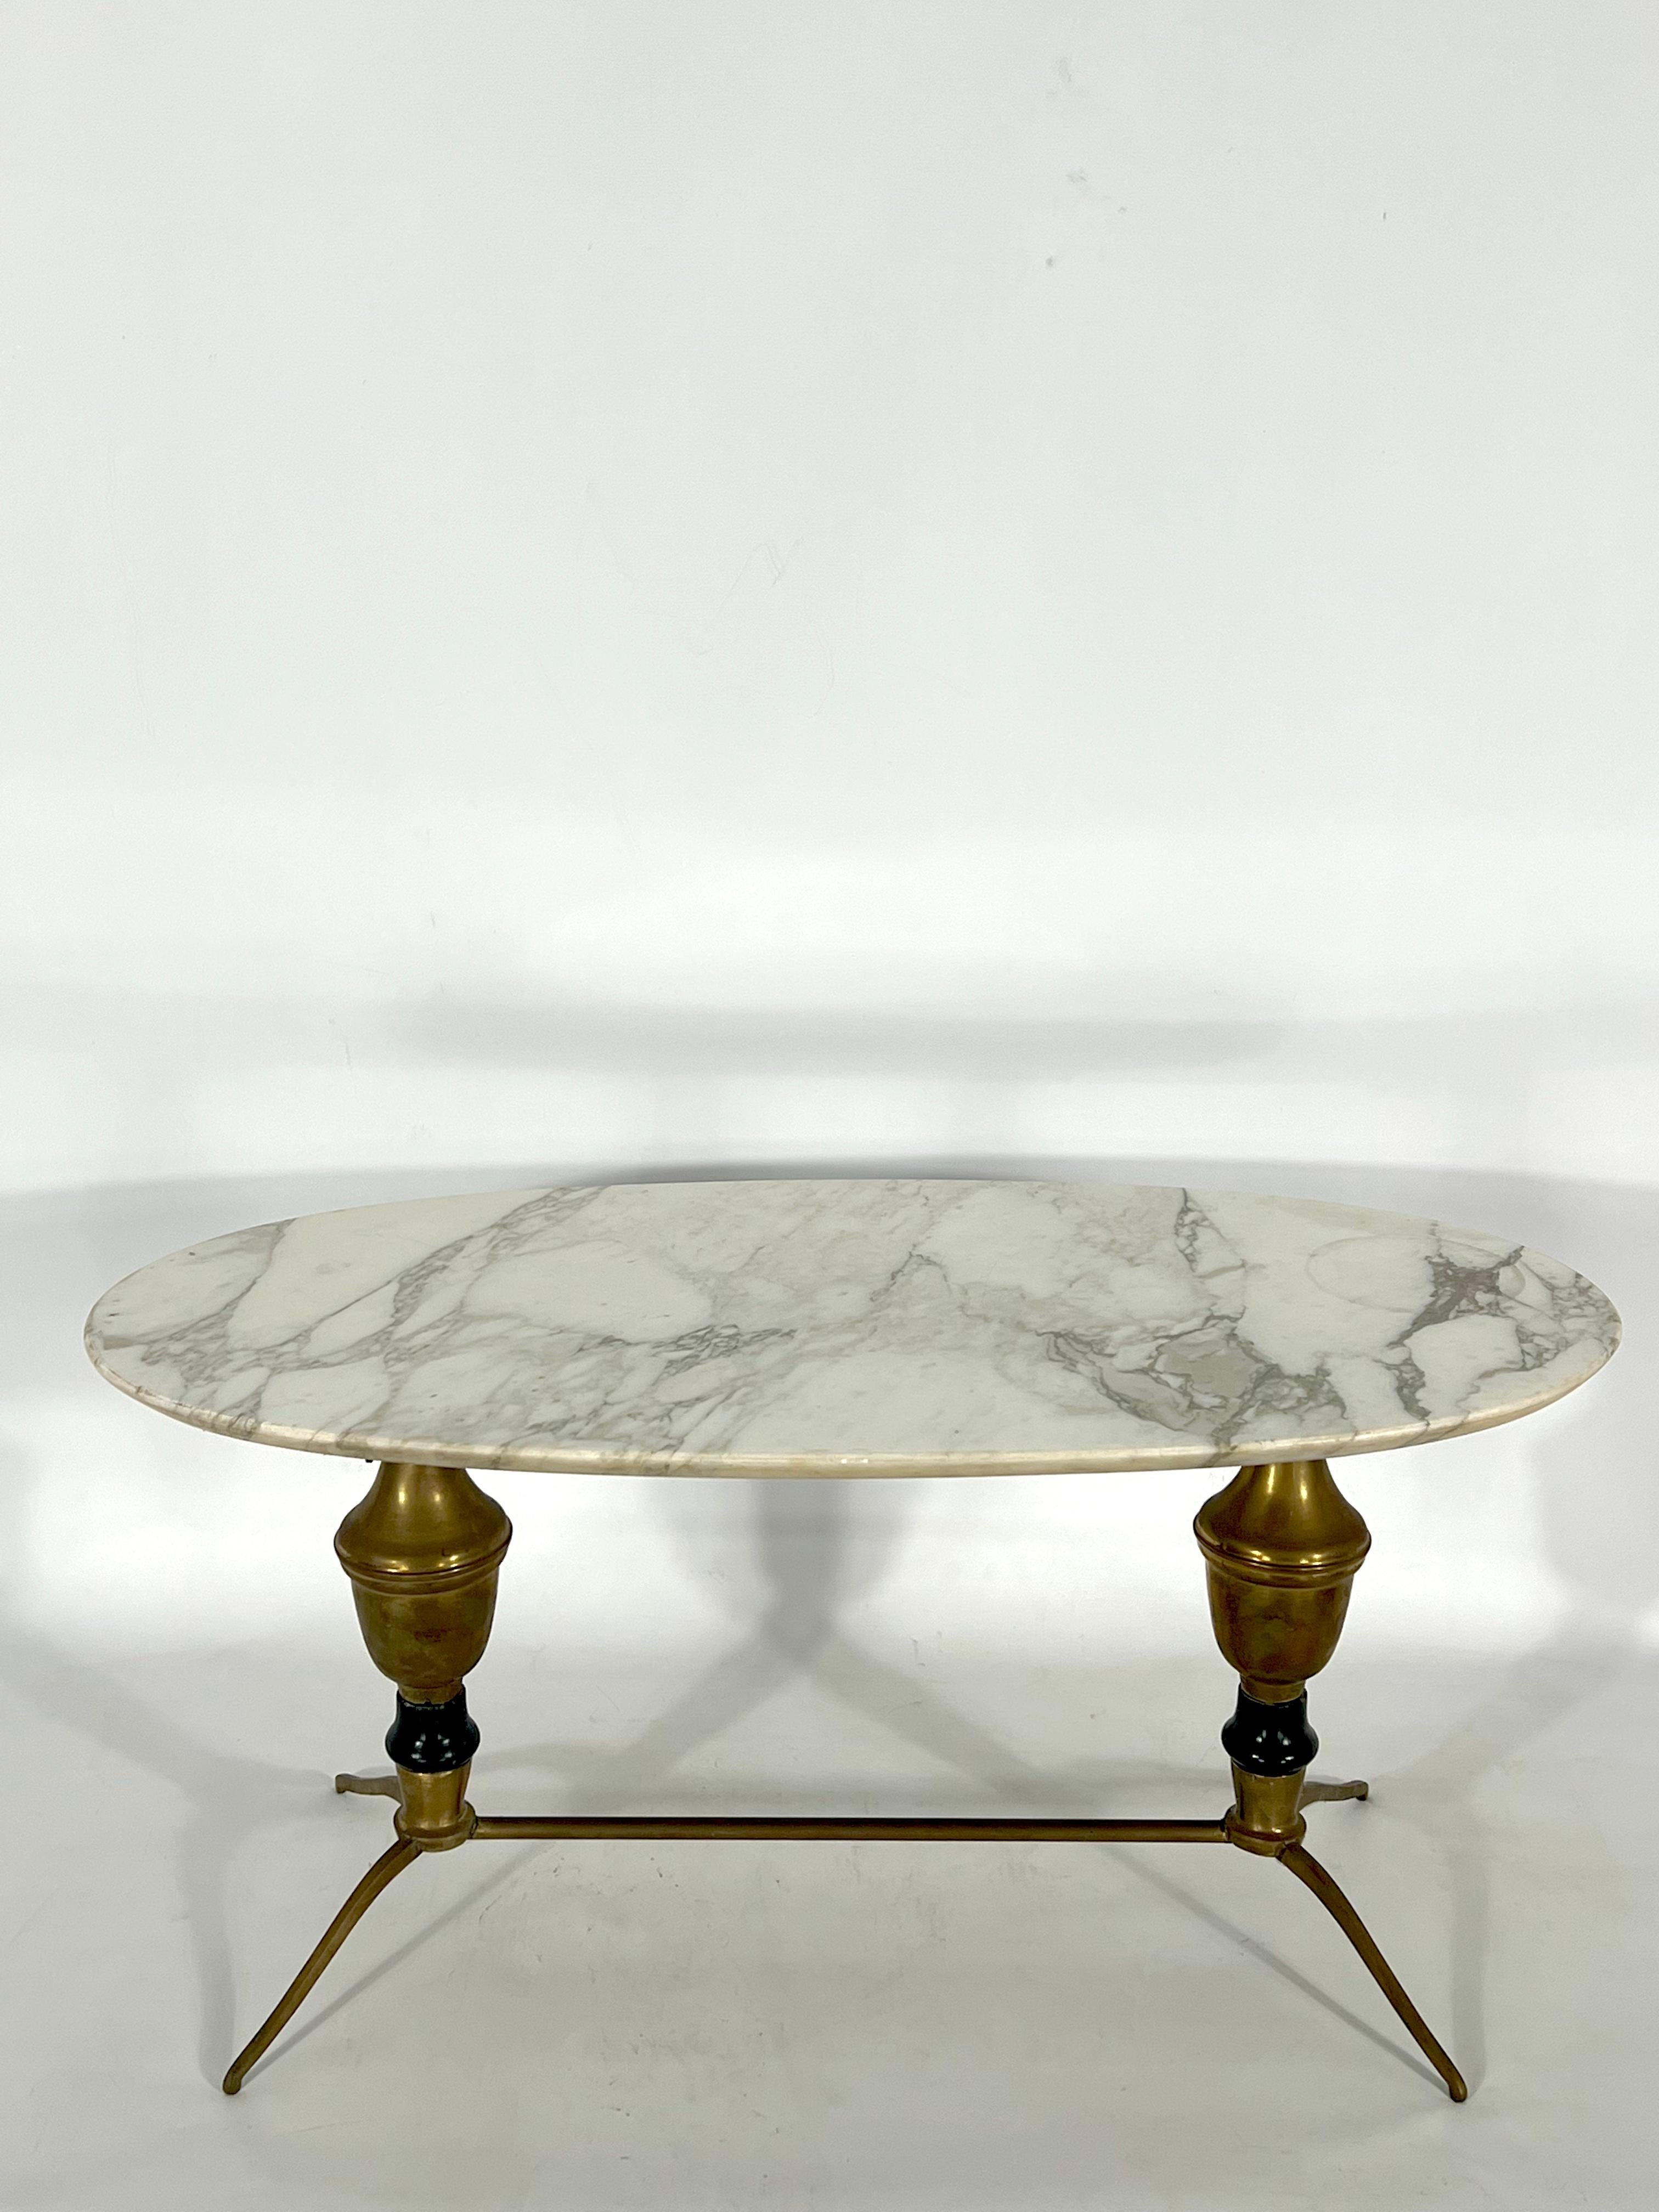 Good vintage condition for this brass and marble coffee or side table produced in Italy during the 1950s. Normal trace of age and use but a crack on the upper part of the brass structure as shown in picture.